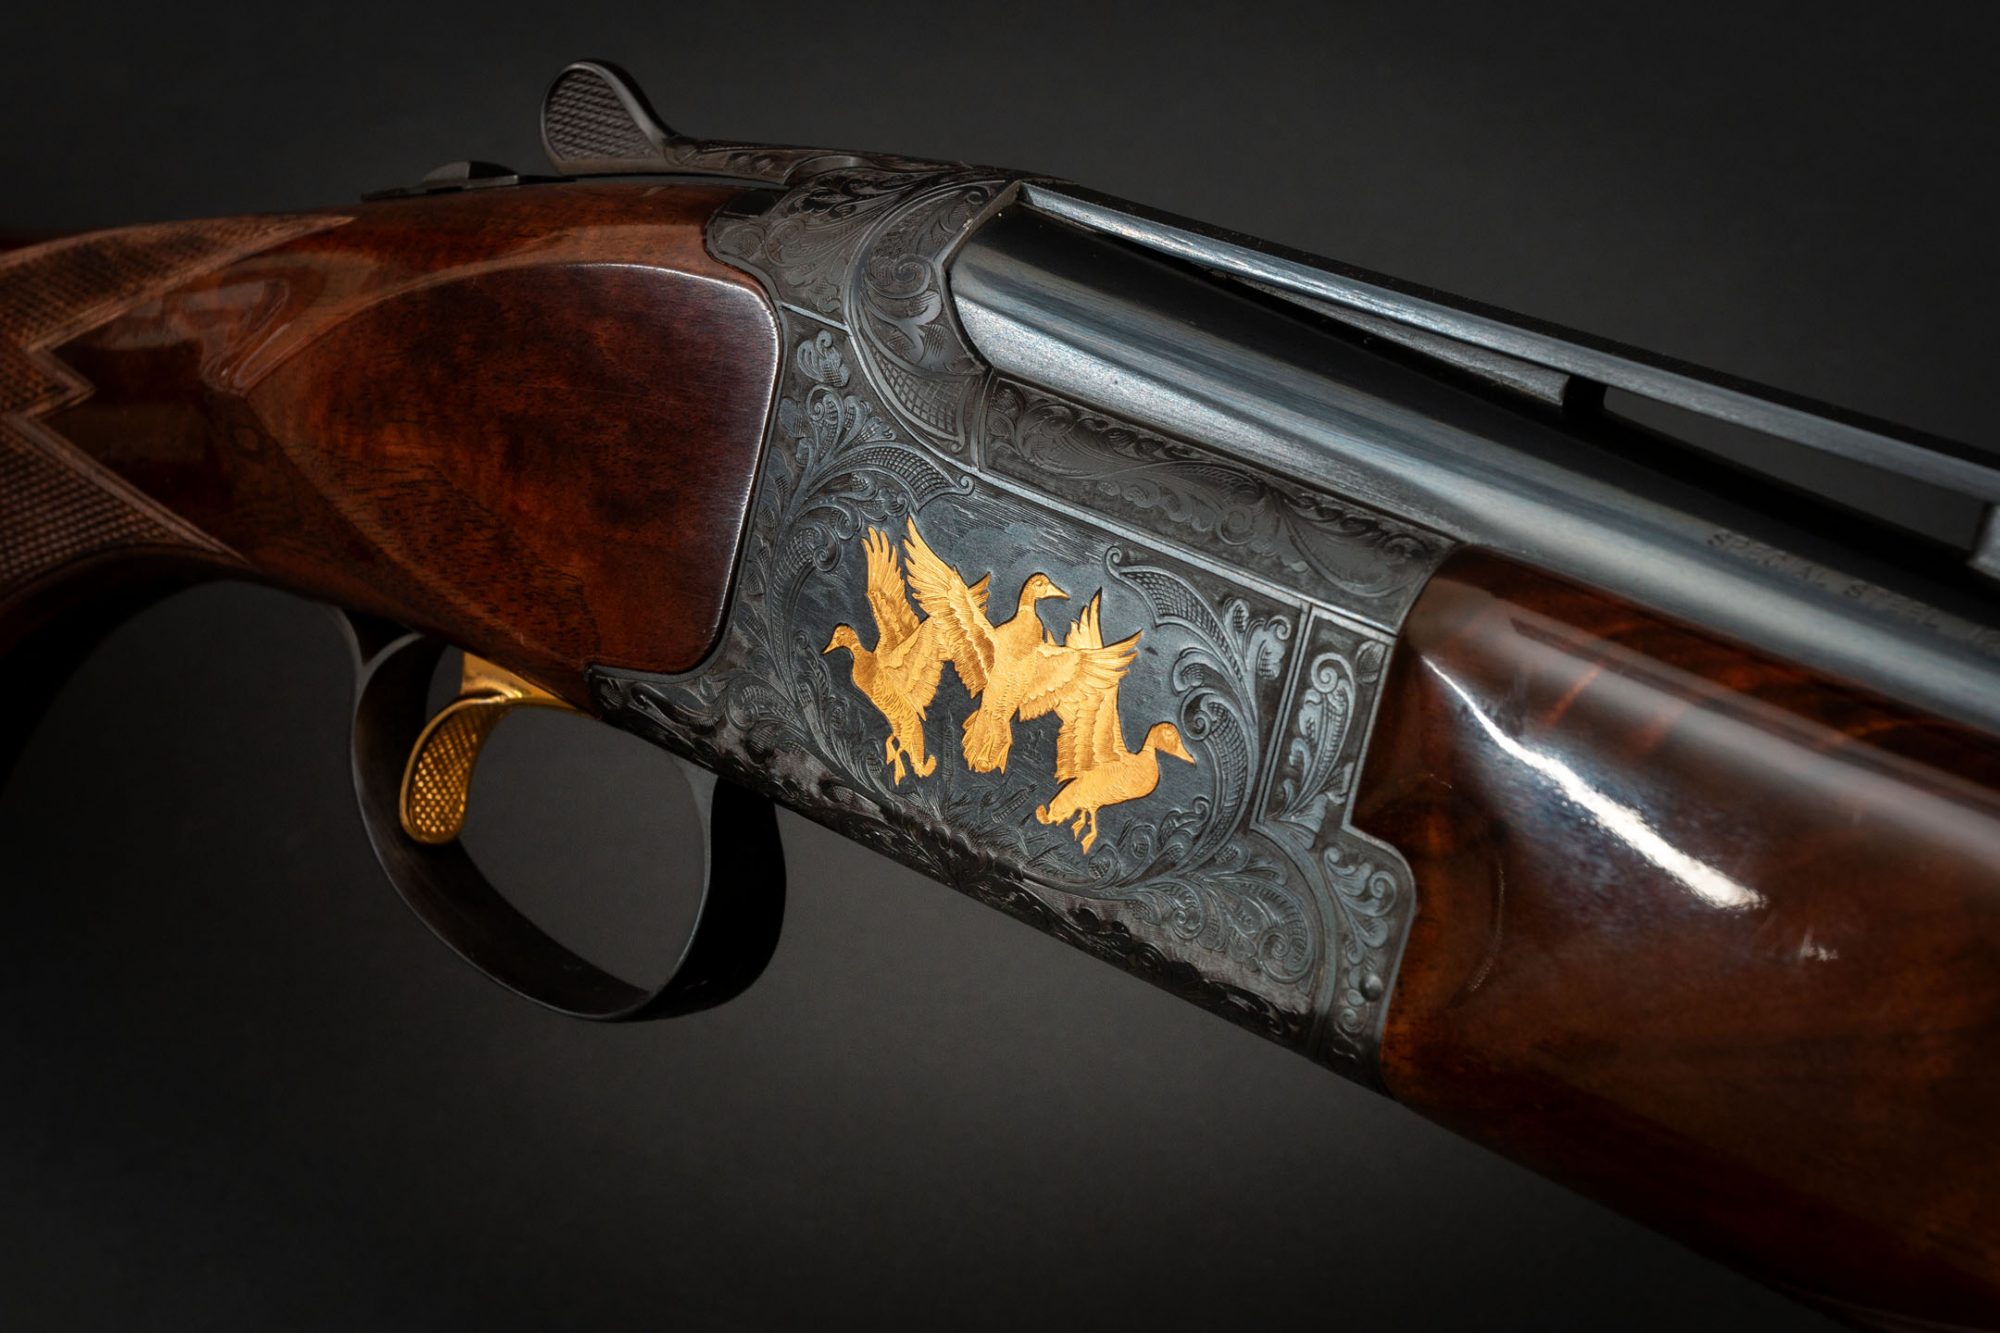 Browning Citori Grade VI 12 gauge shotgun, for sale by Turnbull Restoration of Bloomfield, NY